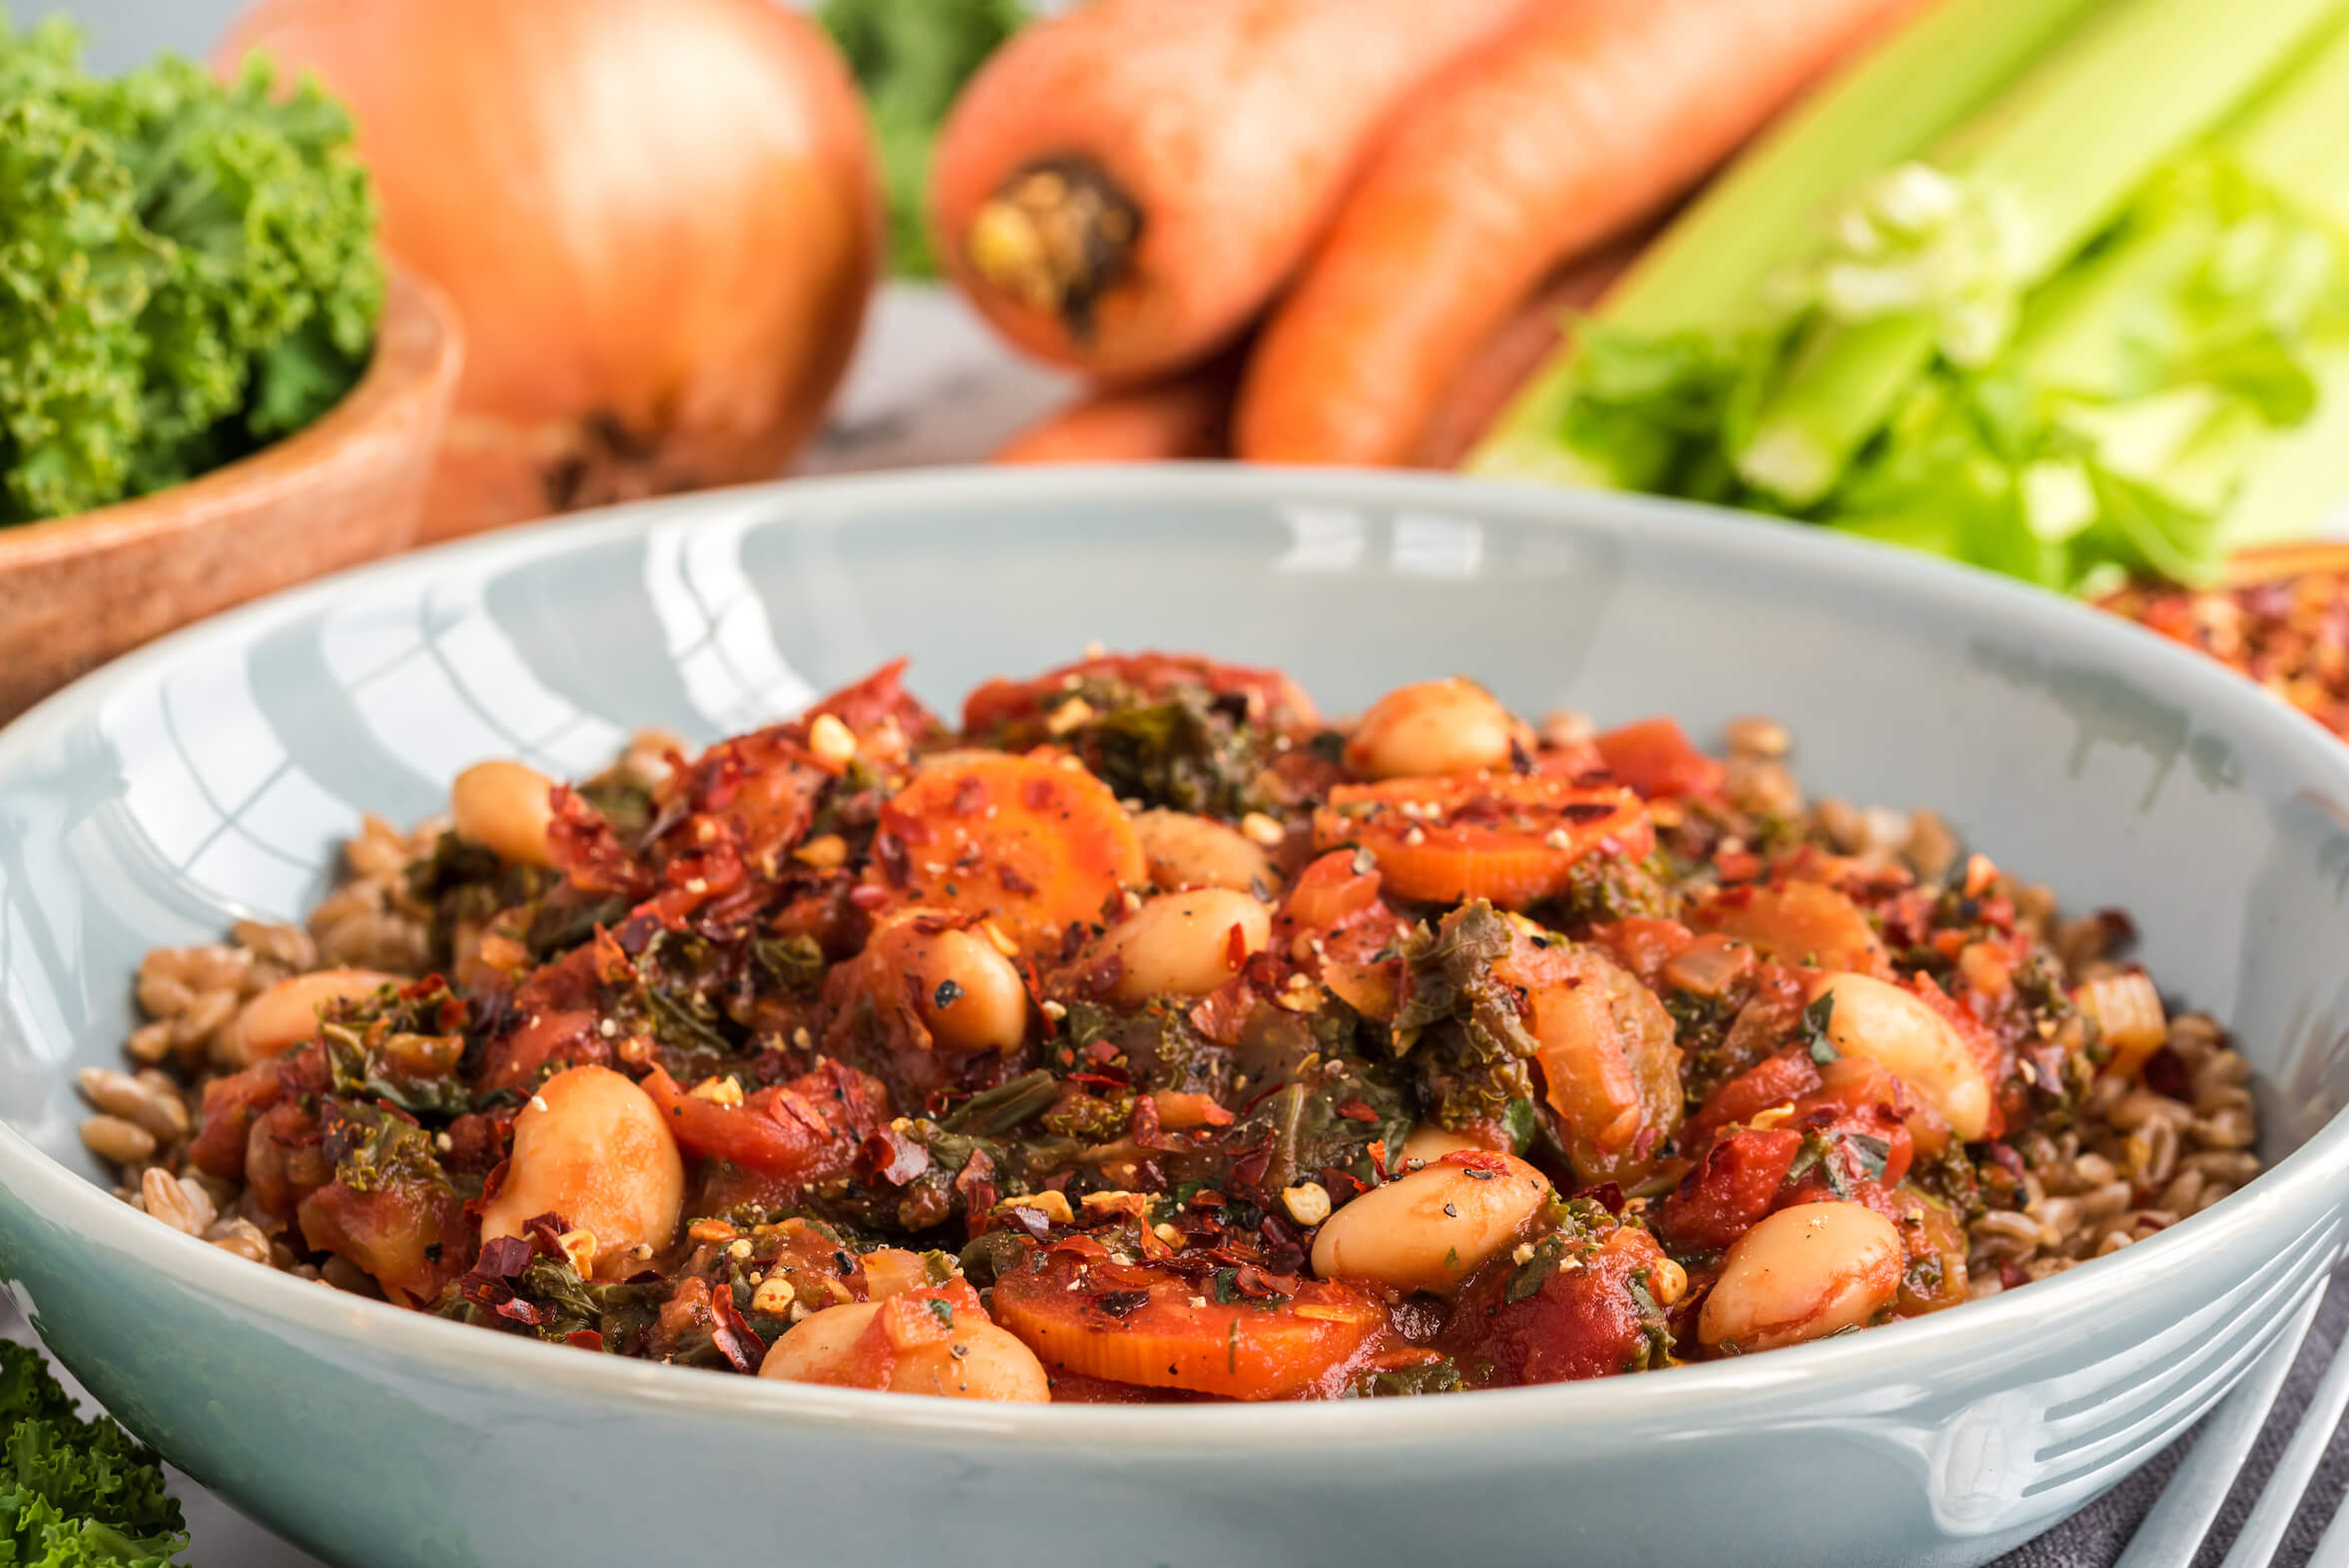 Tuscan beans and kale